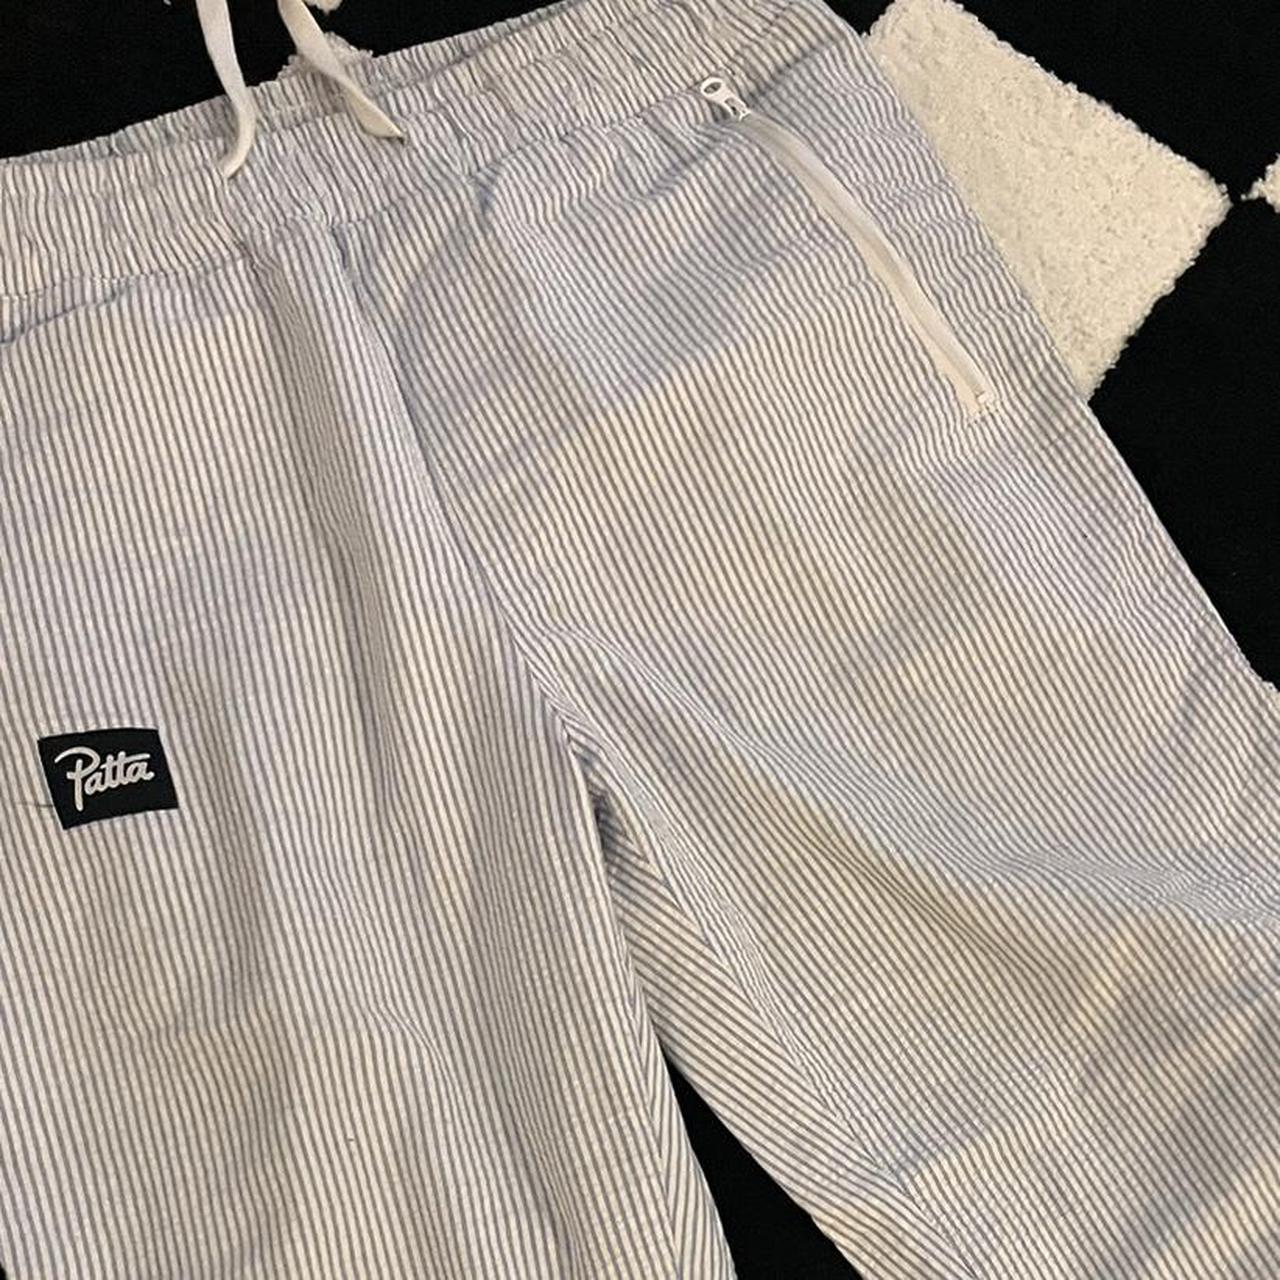 Product Image 1 - Patta Joggers size S